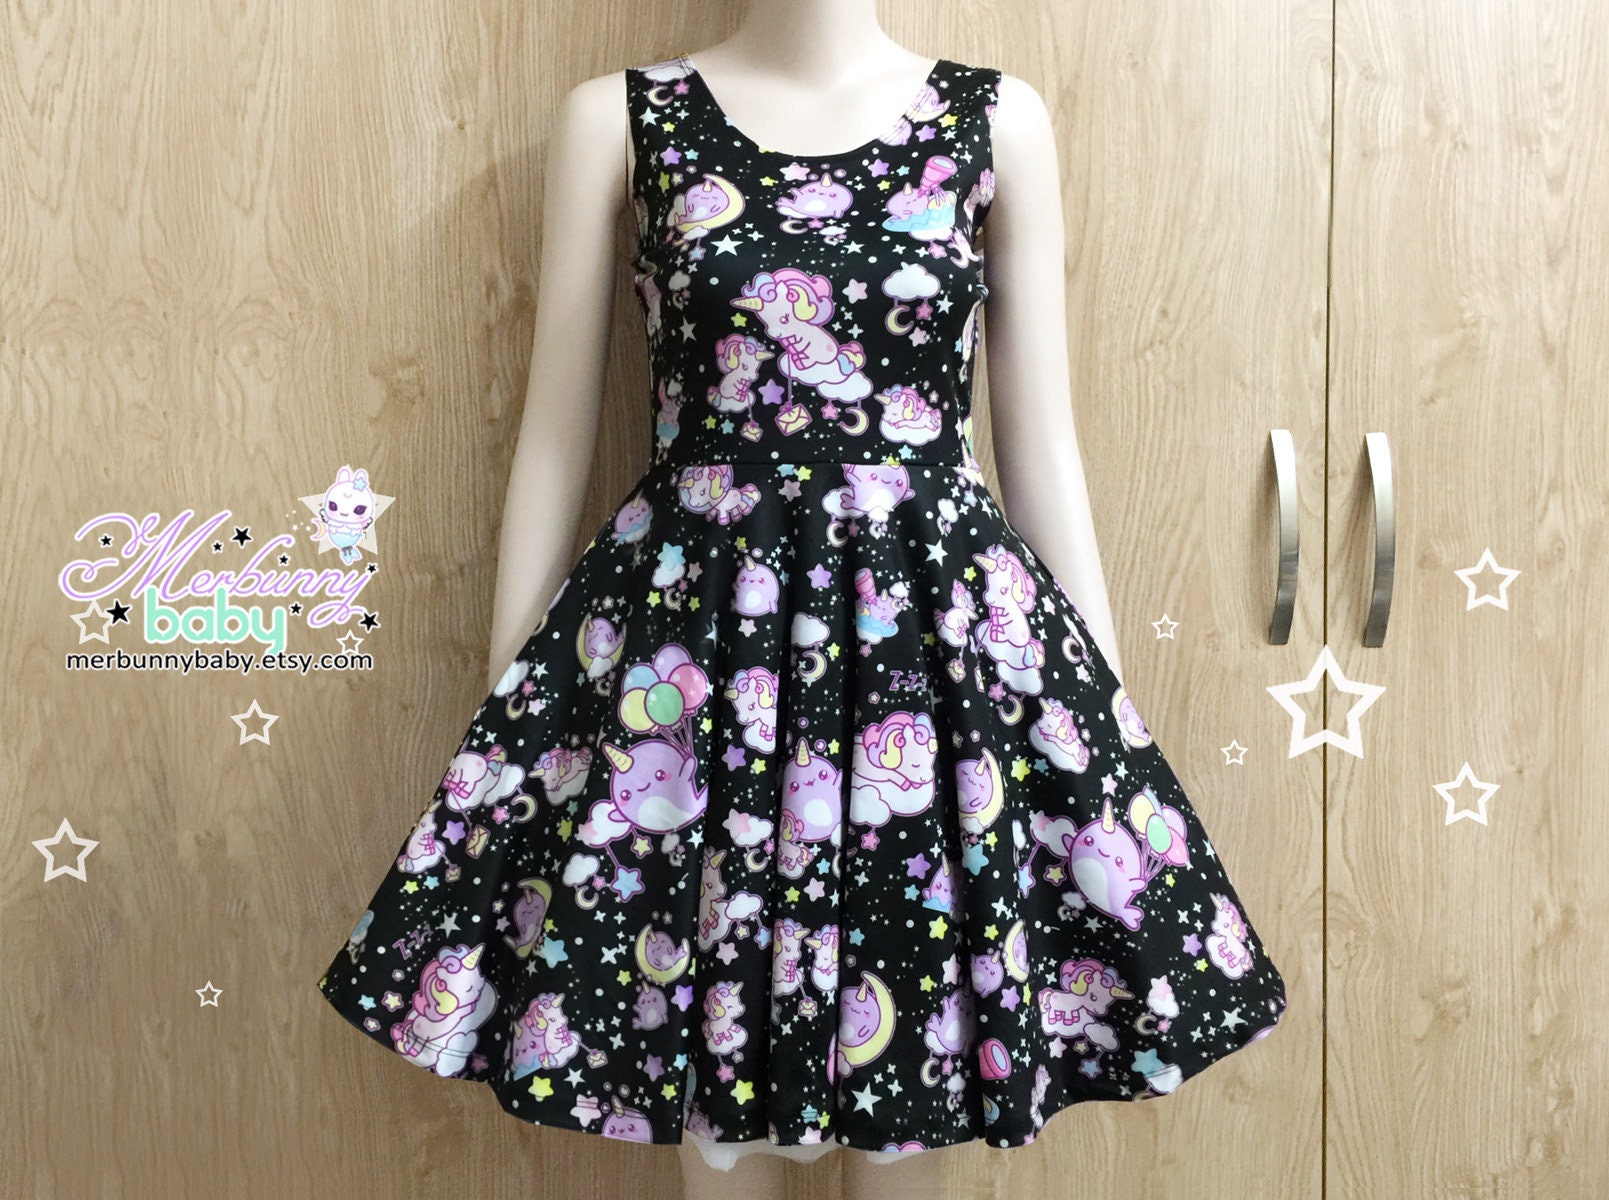 Y2K Cute Kawaii Skater Dress with Unicorns and Narwhals